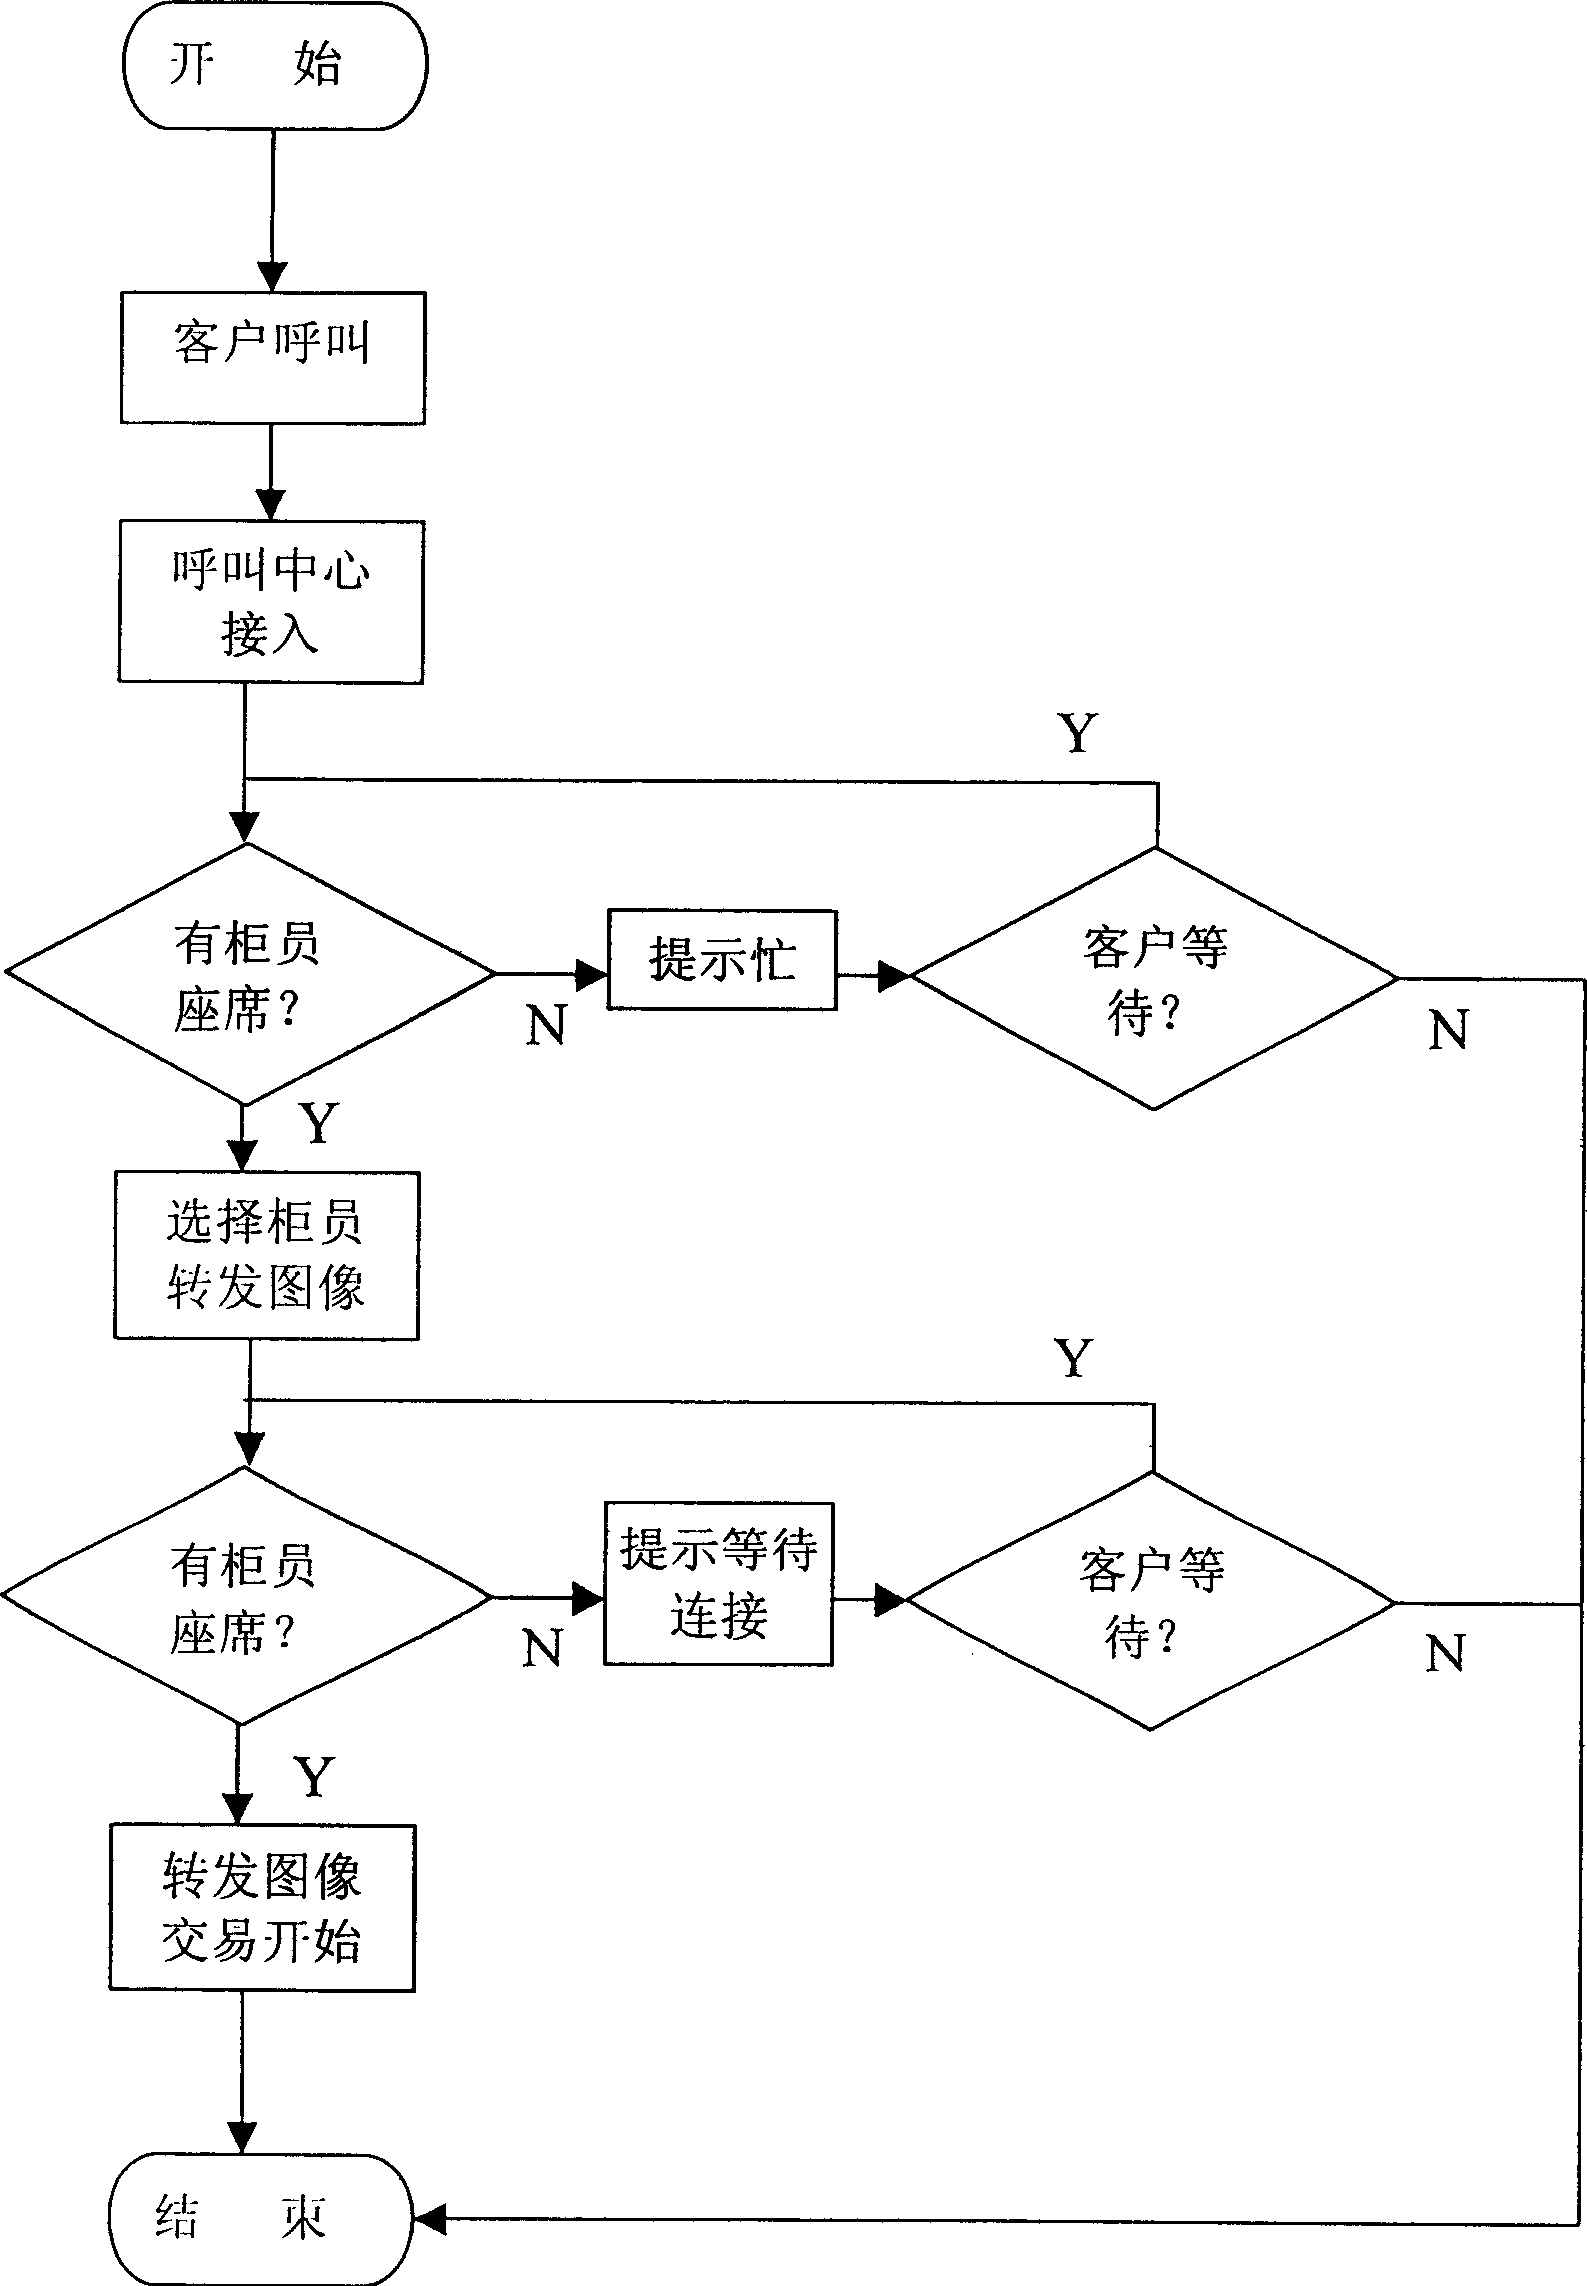 Long-distance service system and method for implementing long-distance service